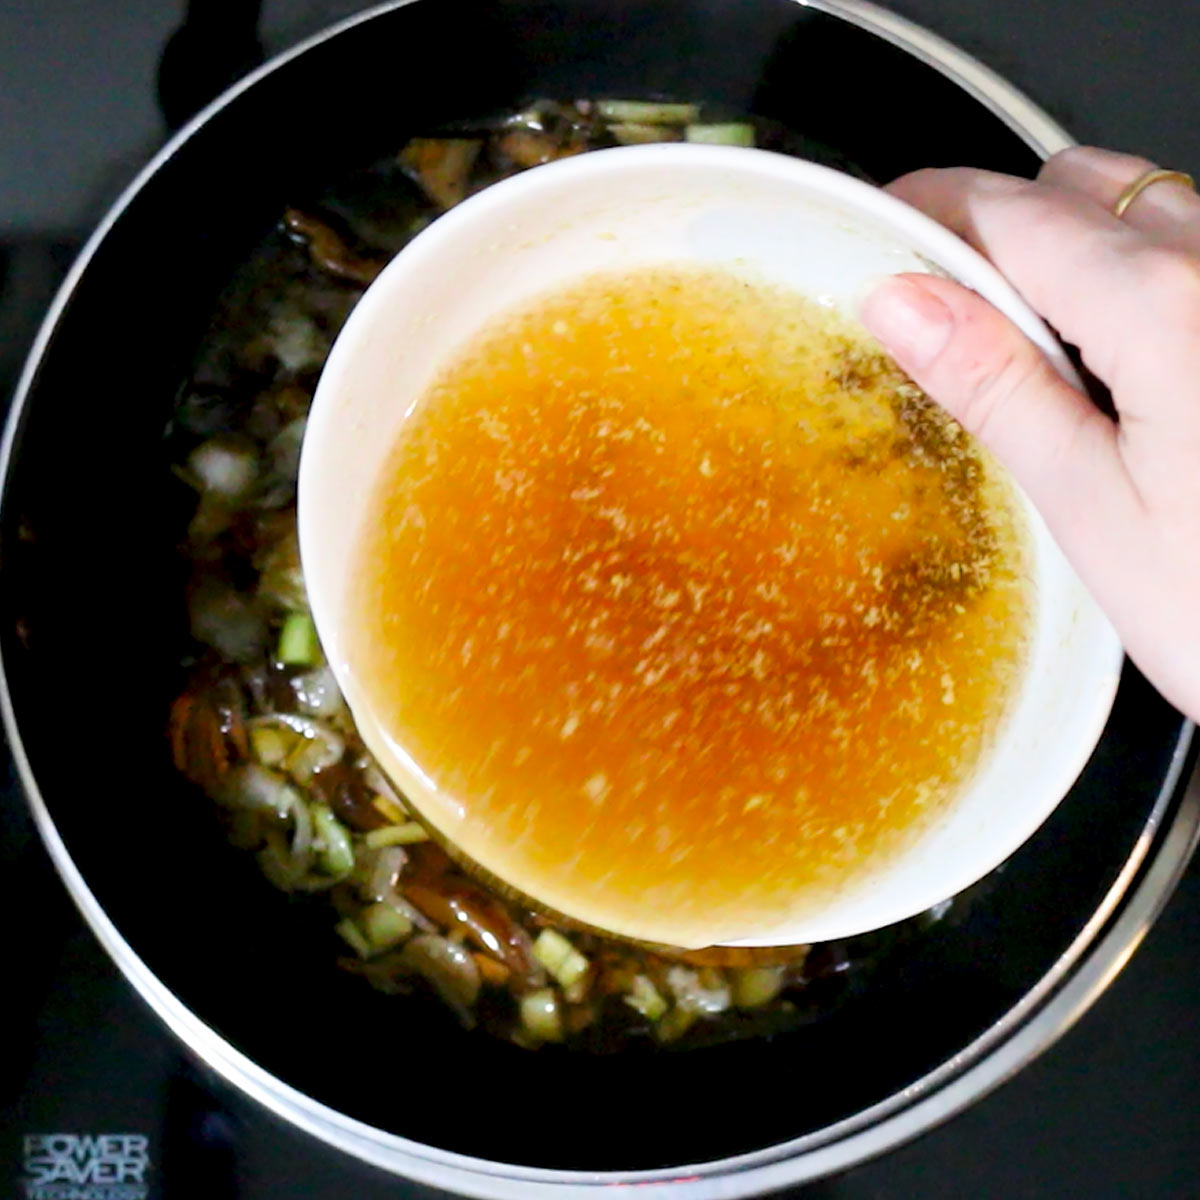 pour in clear beef broth